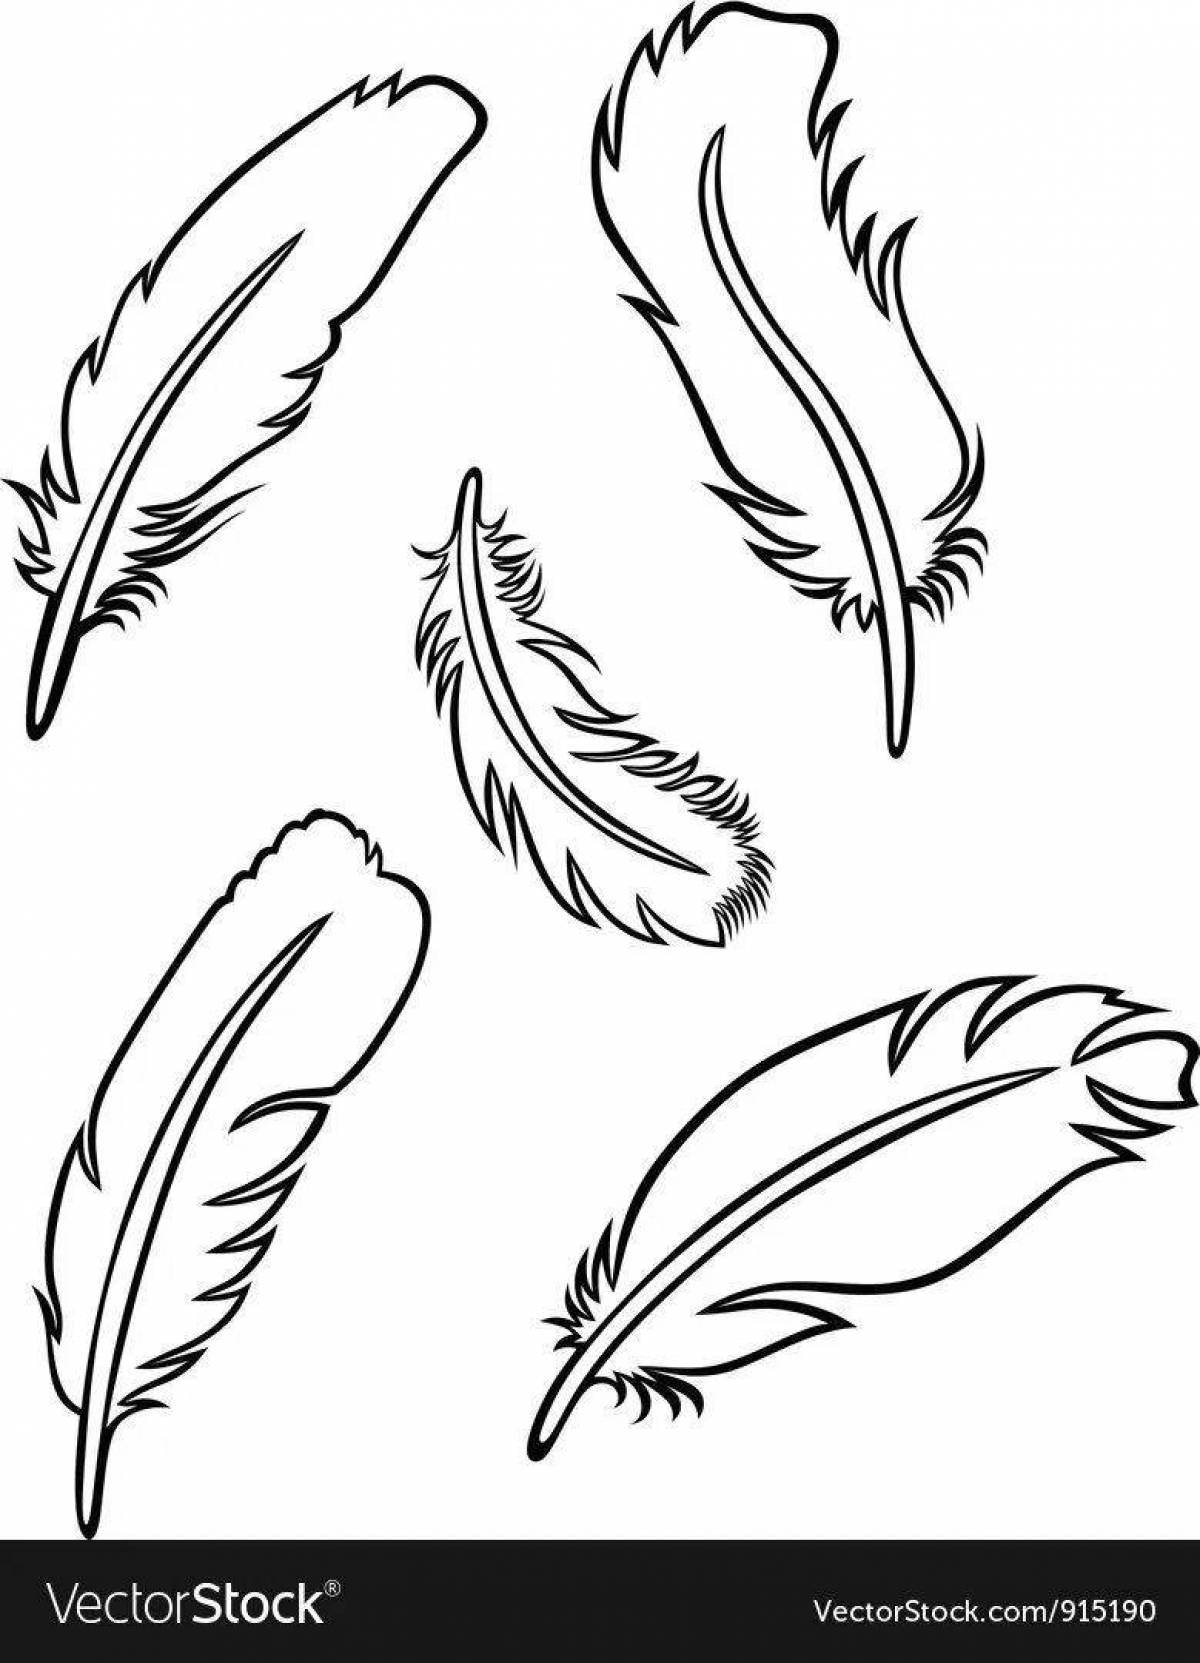 Coloring book with bright feather pattern